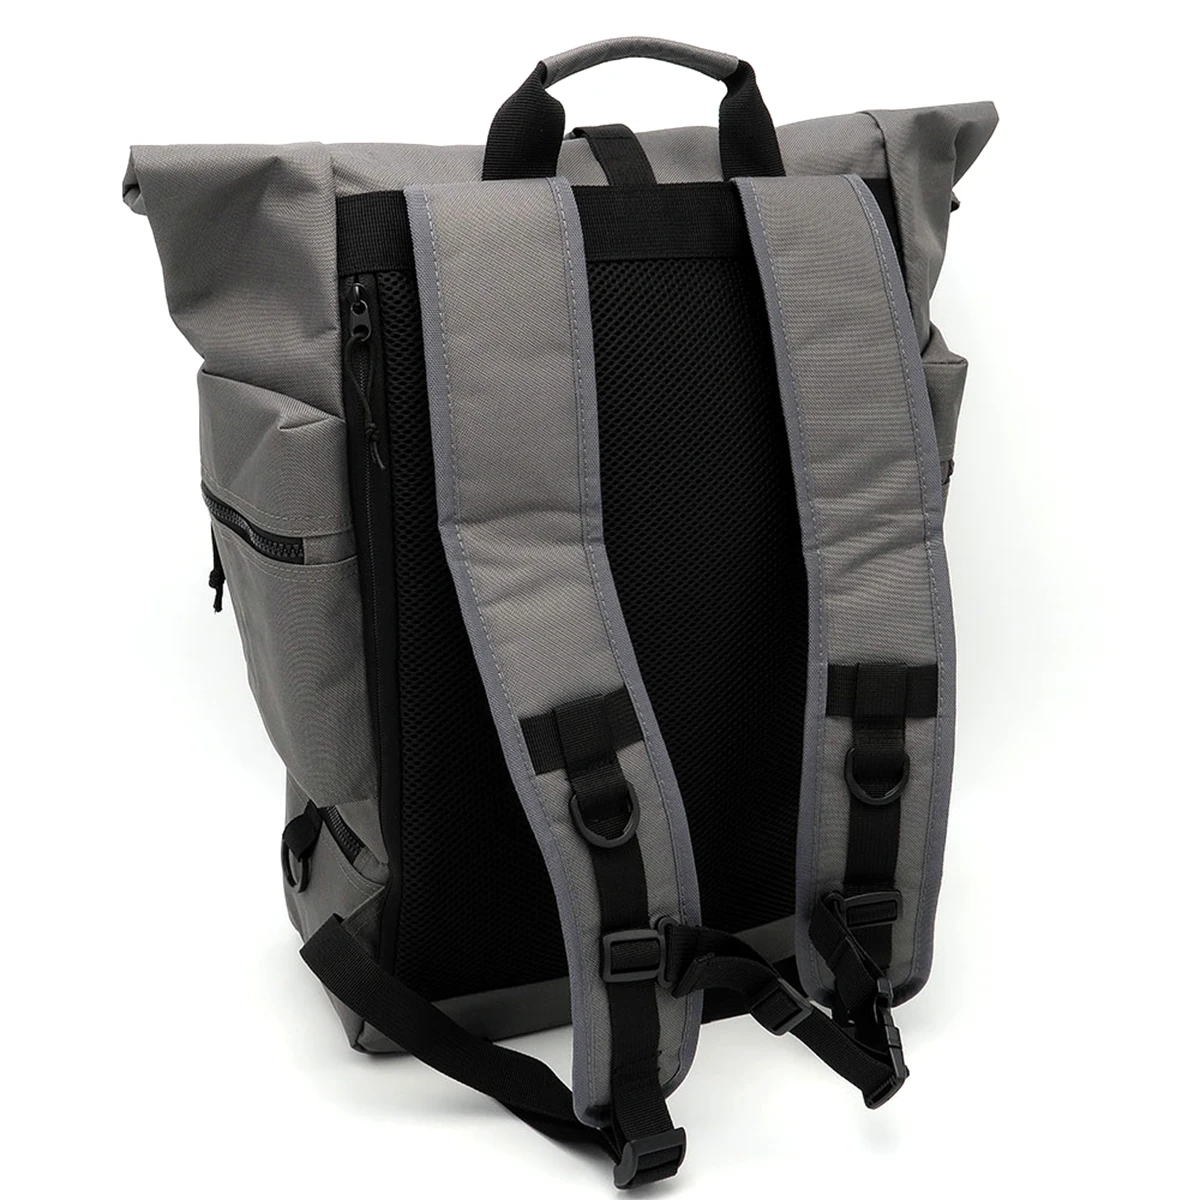 Call of Duty Rolltop Backpack "Blind" Grey Thumbnail 4